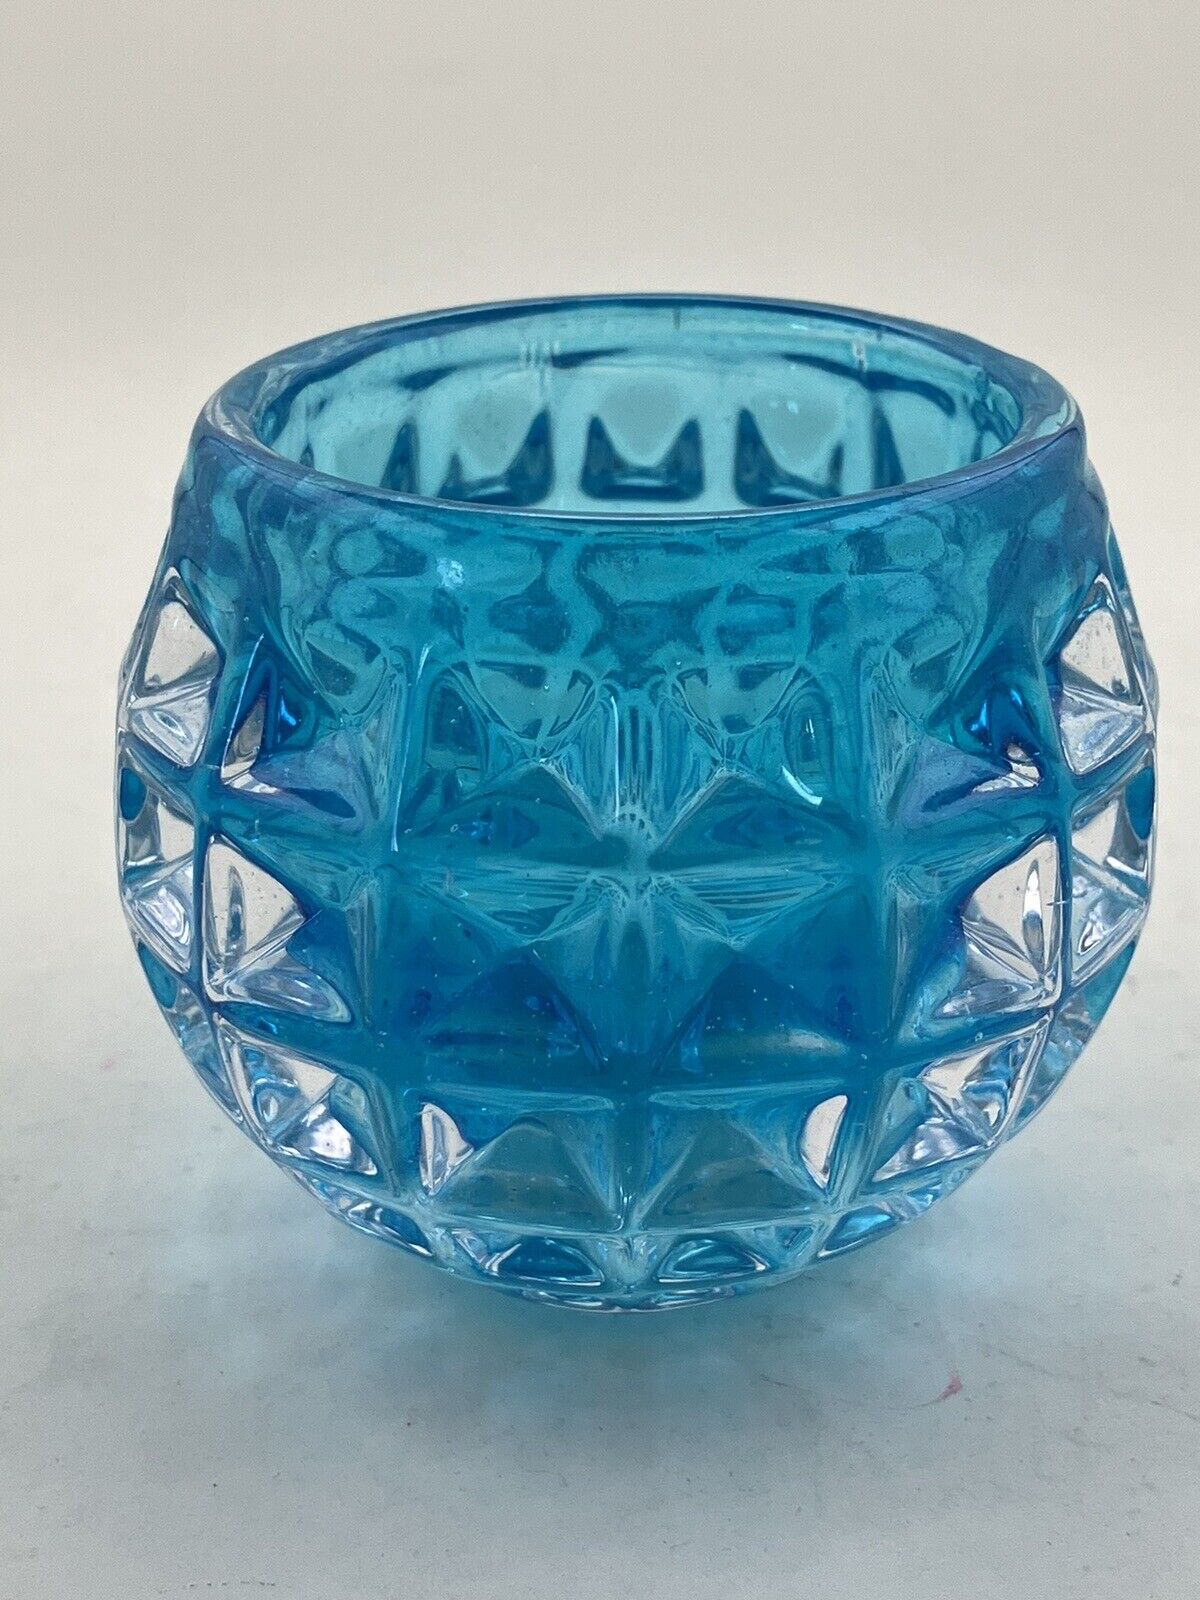 Aqua Votive Candle Holder 2 1/2” Round And 2 1/2” High Brand New In A Box